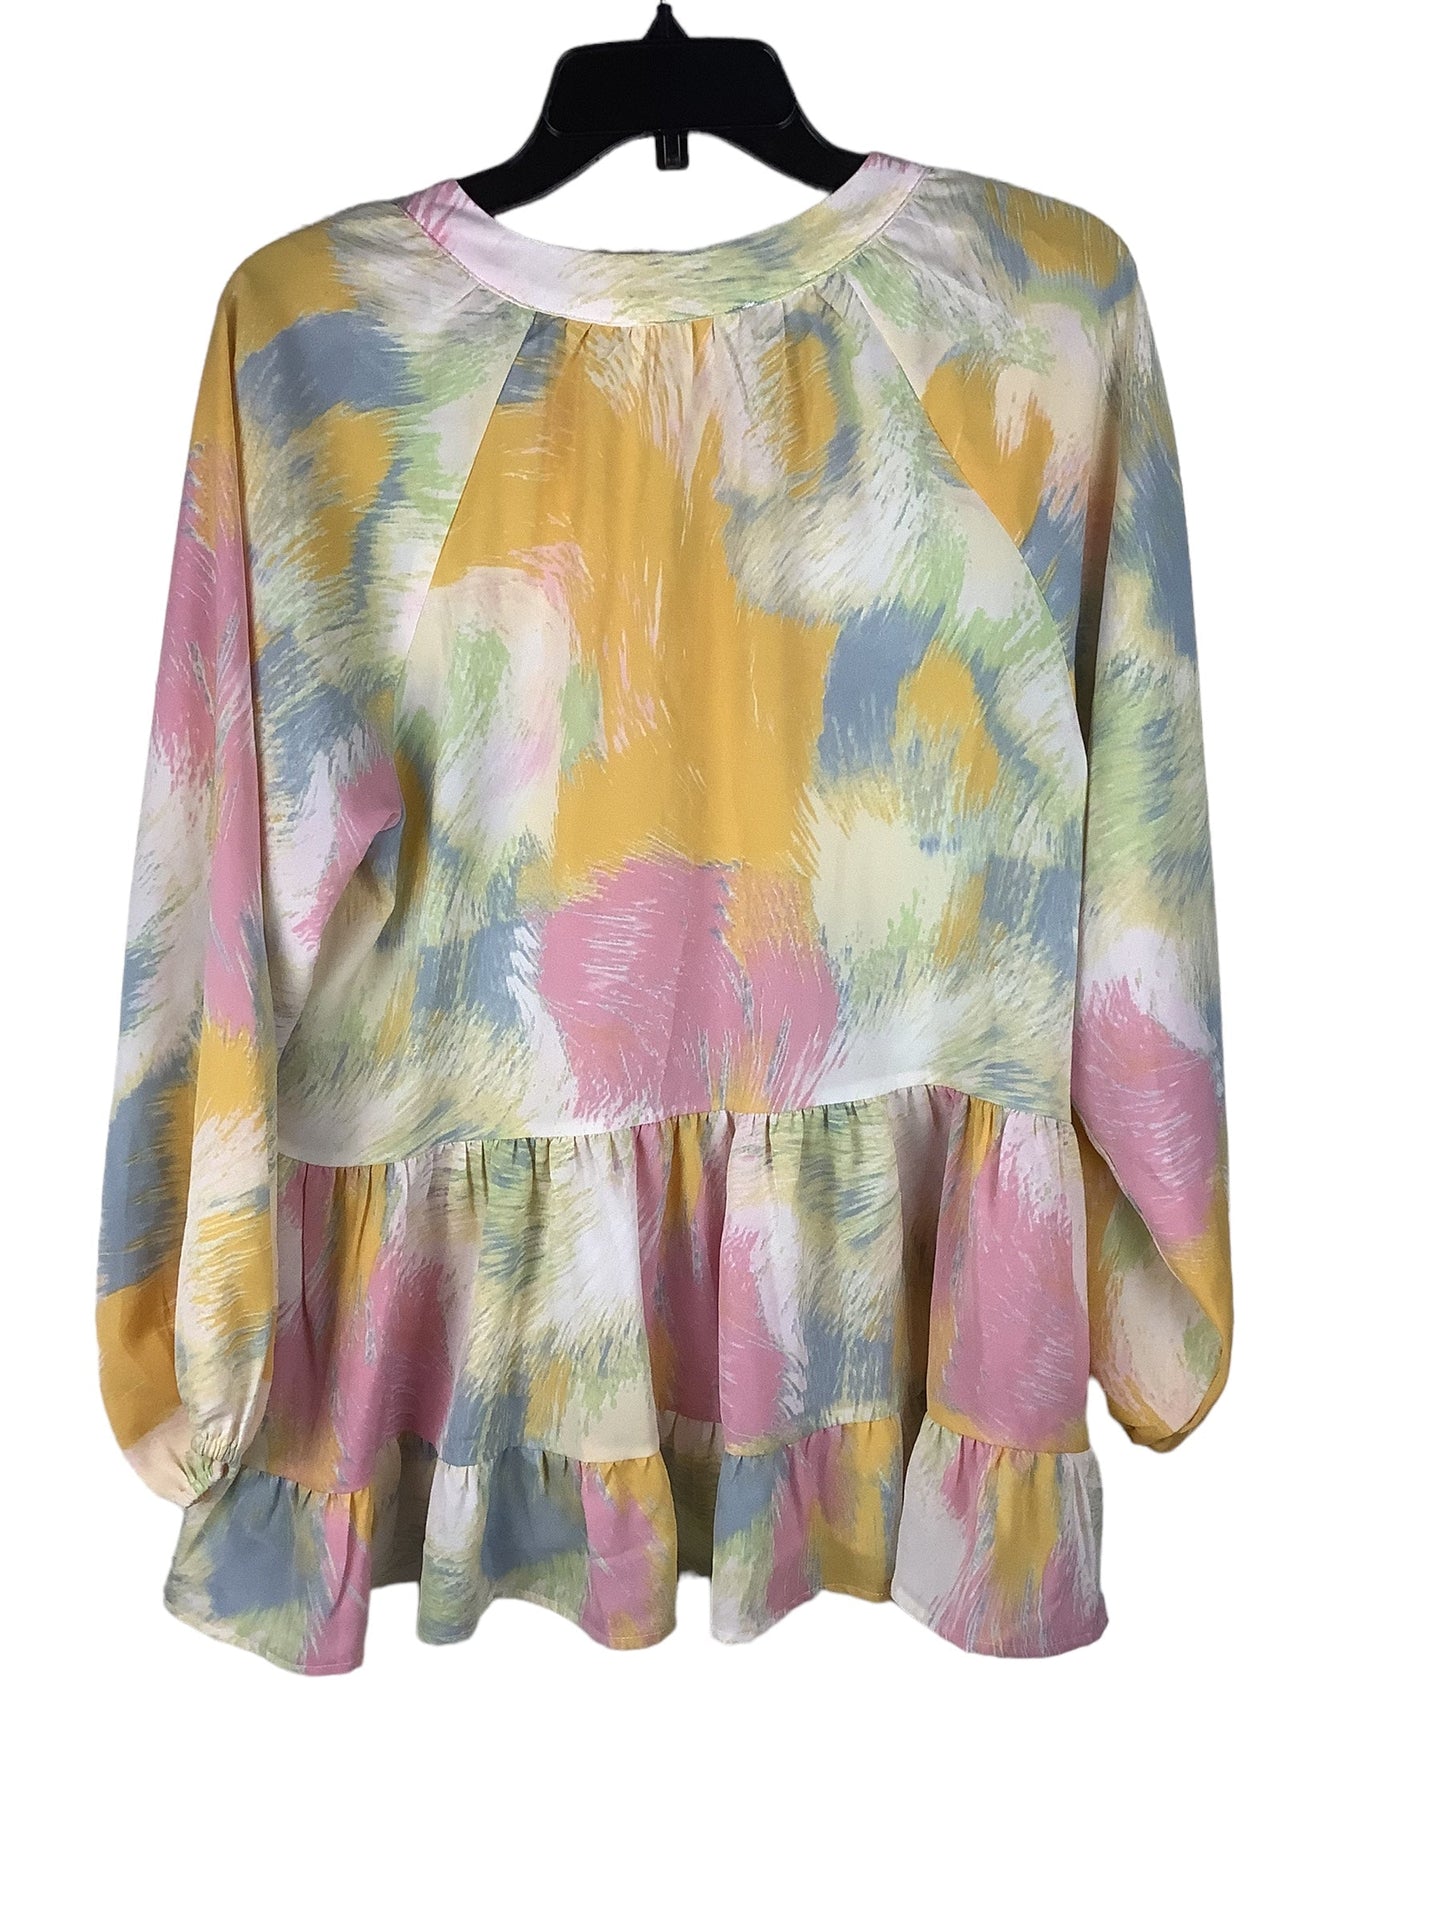 Multi-colored Top Long Sleeve Entro, Size M